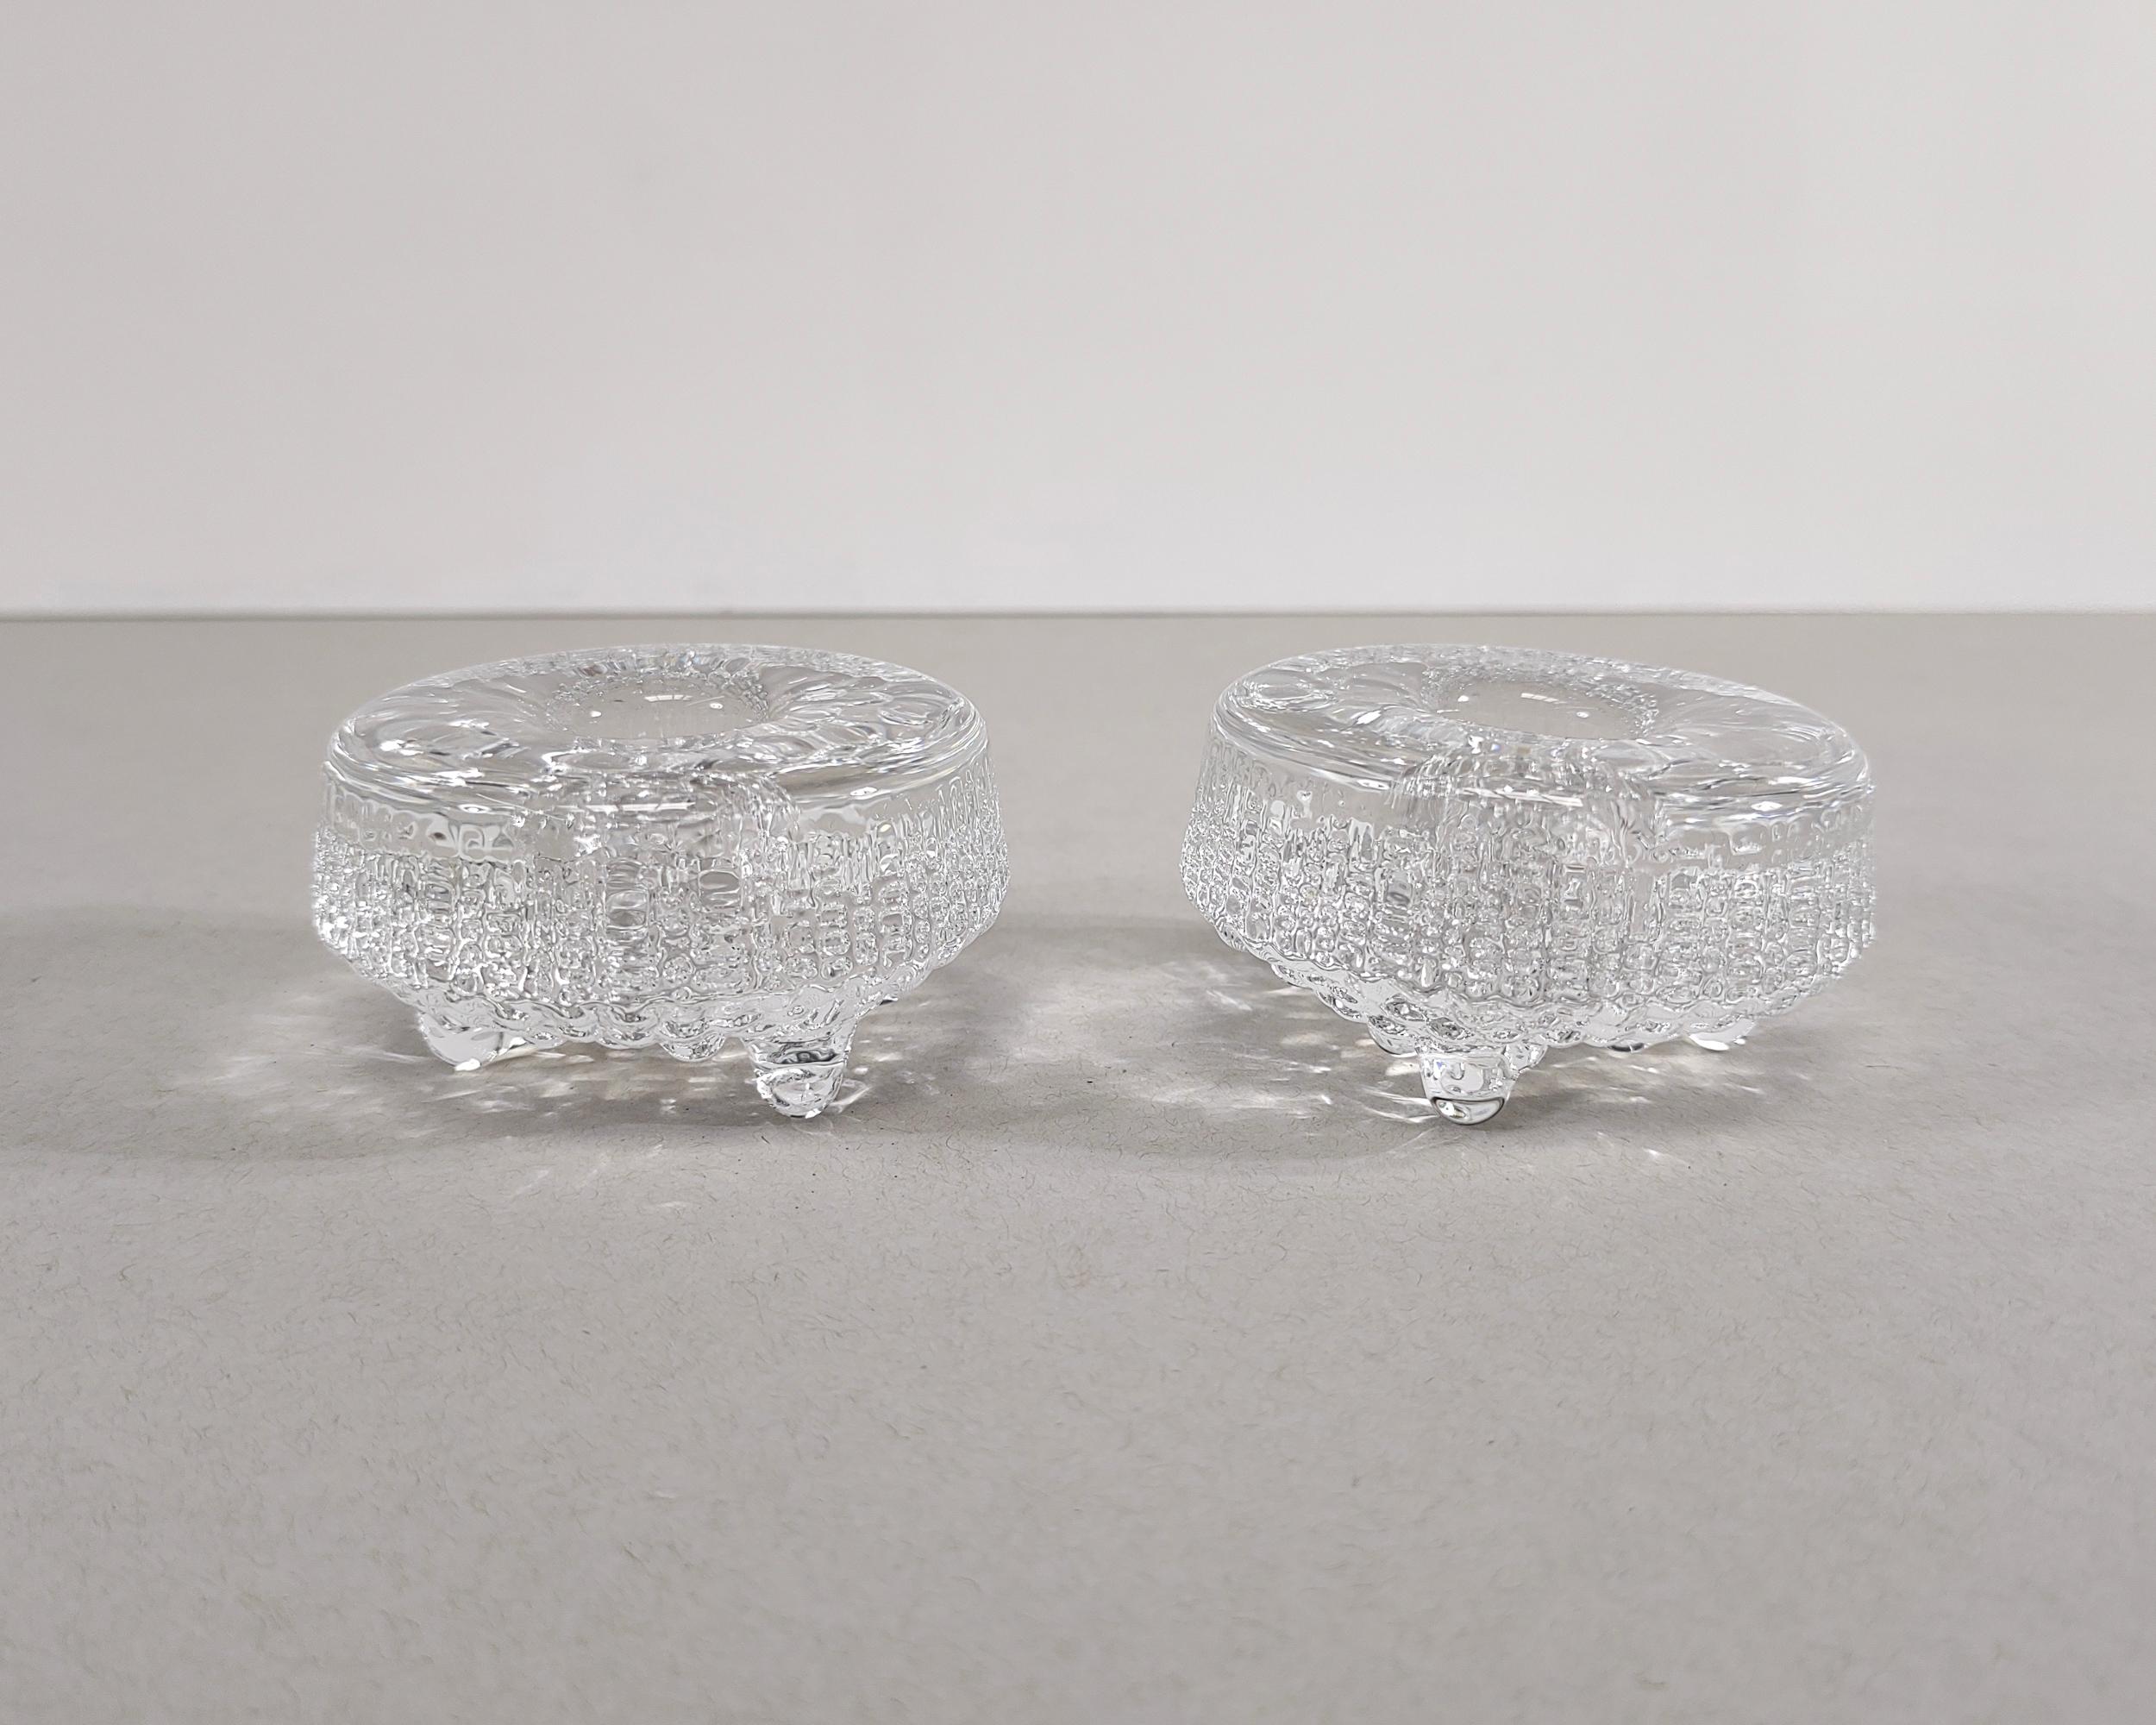 Set of two solid glass candlestick holders from the 'Ultima Thule' collection by iconic Finnish designer, Tapio Wirkkala. Classic icy drip detail that Wirkkala is known for. Excellent vintage condition.

2-5/8